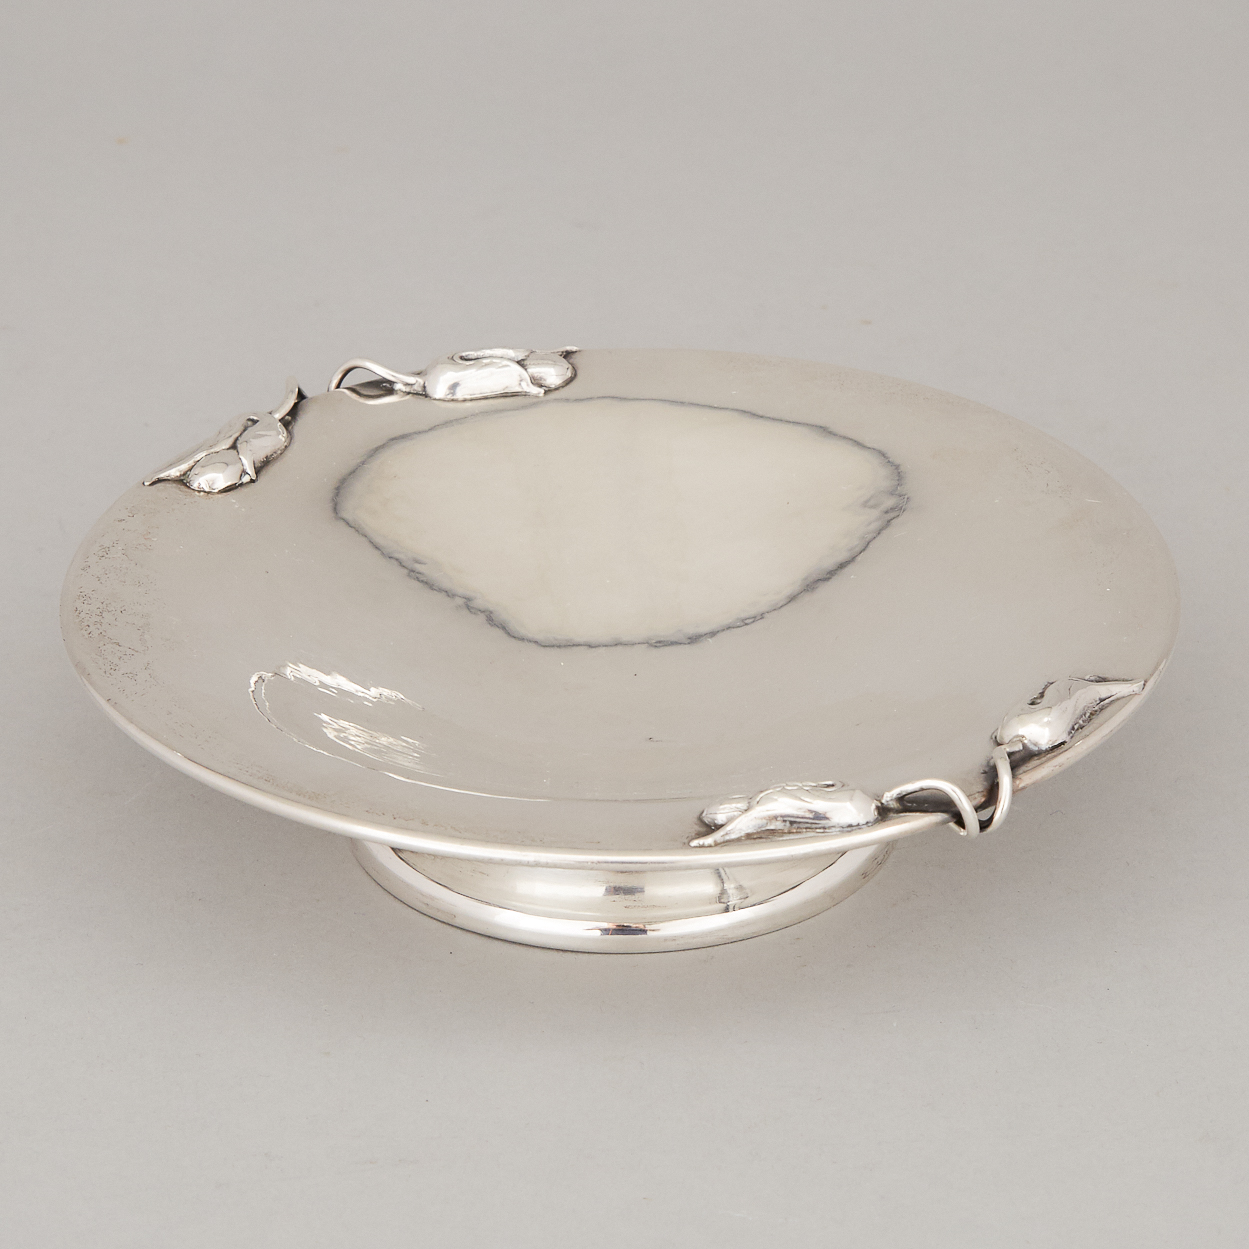 Canadian Silver Circular Dish, Carl Poul Petersen, Montreal, Que., mid-20th century